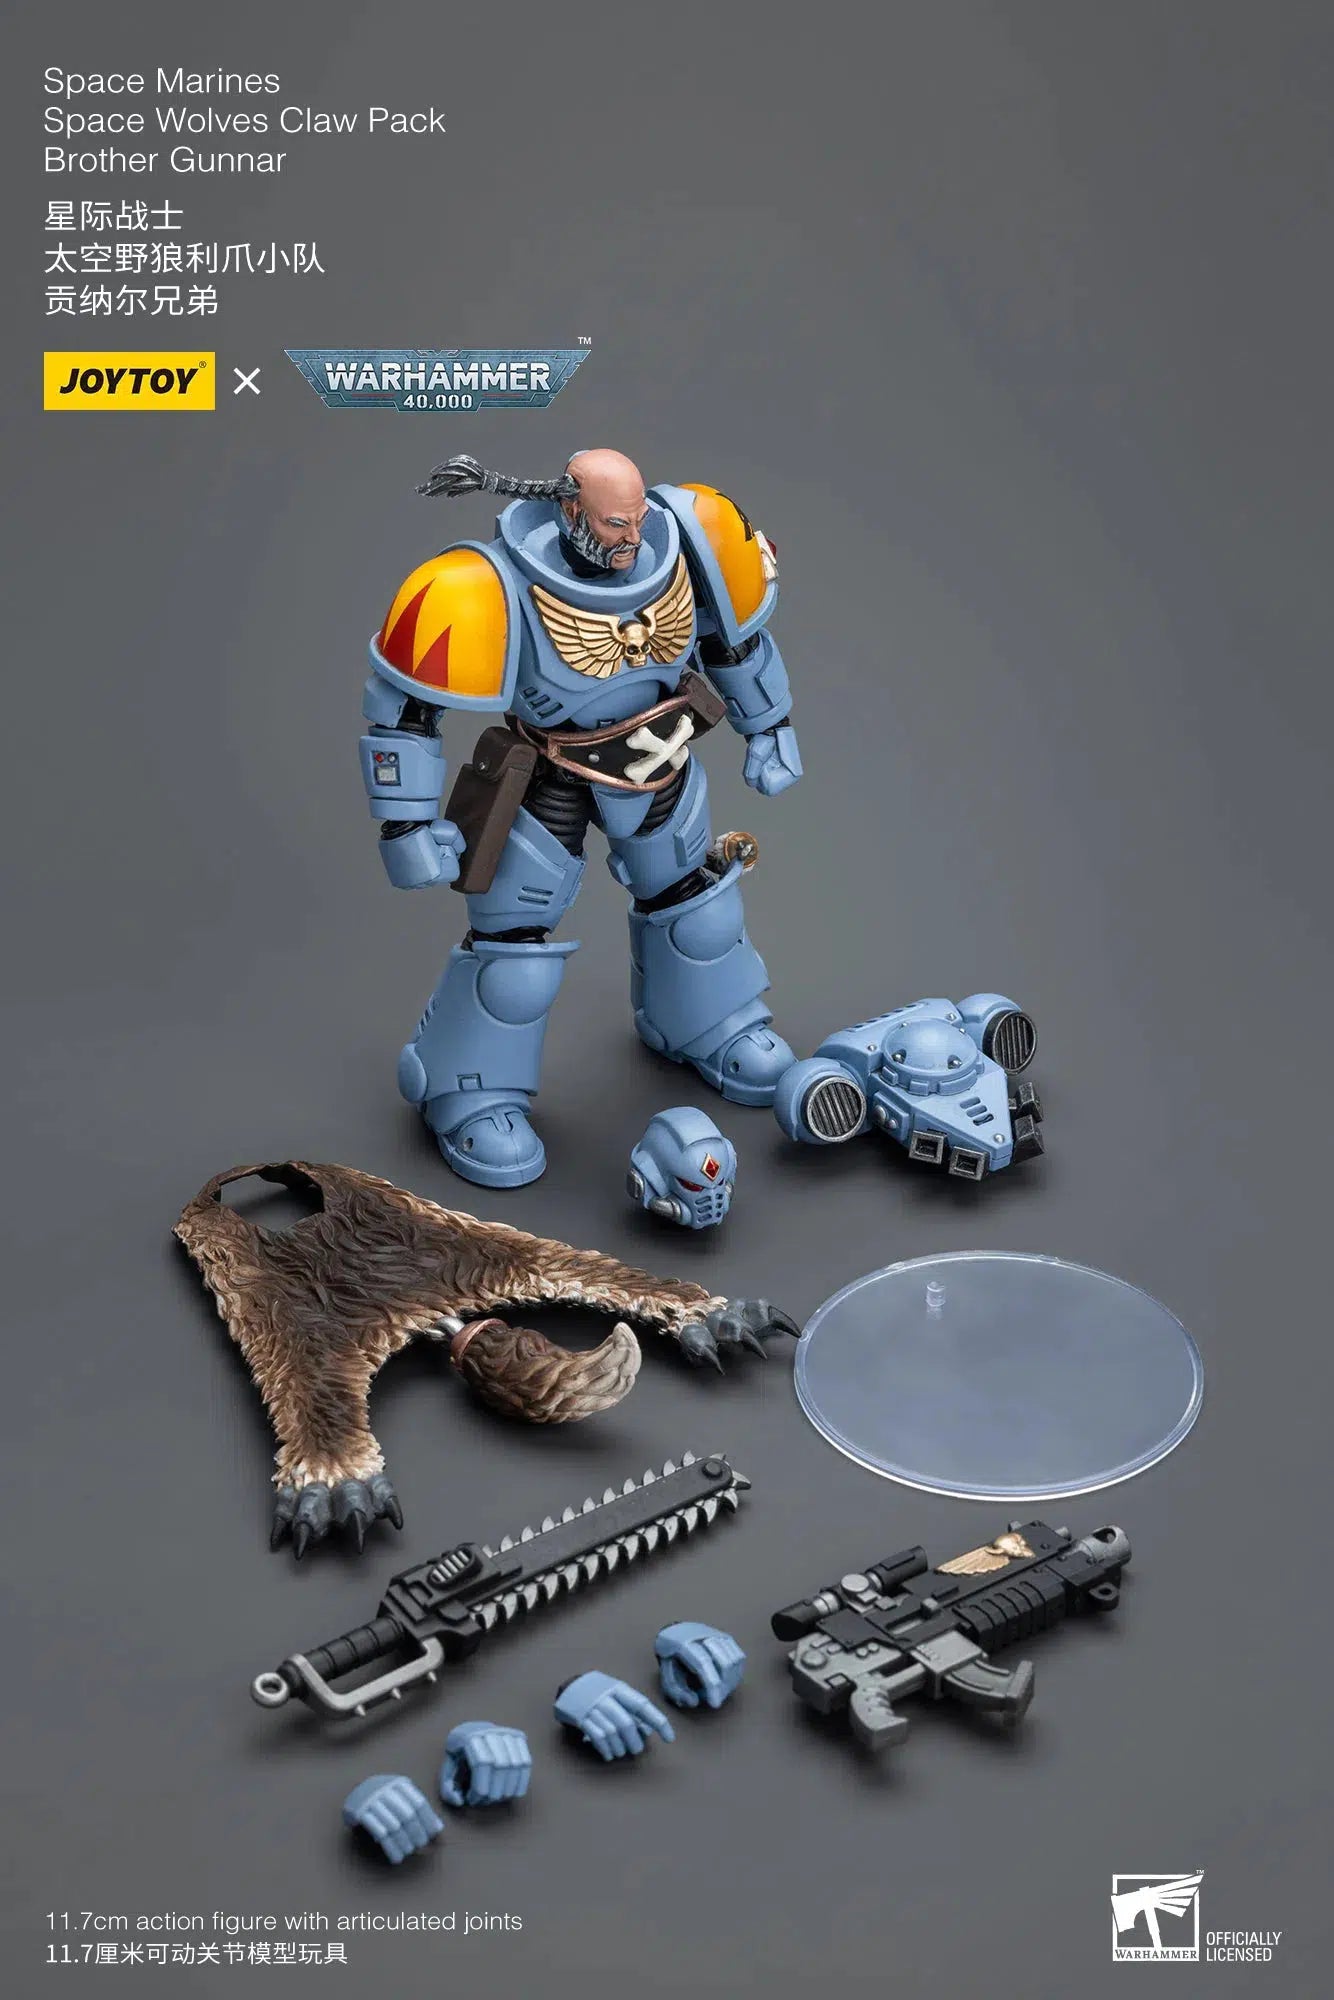 Warhammer 40K: Space Wolves: Claw Pack: Brother Gunnar: Joy Toy